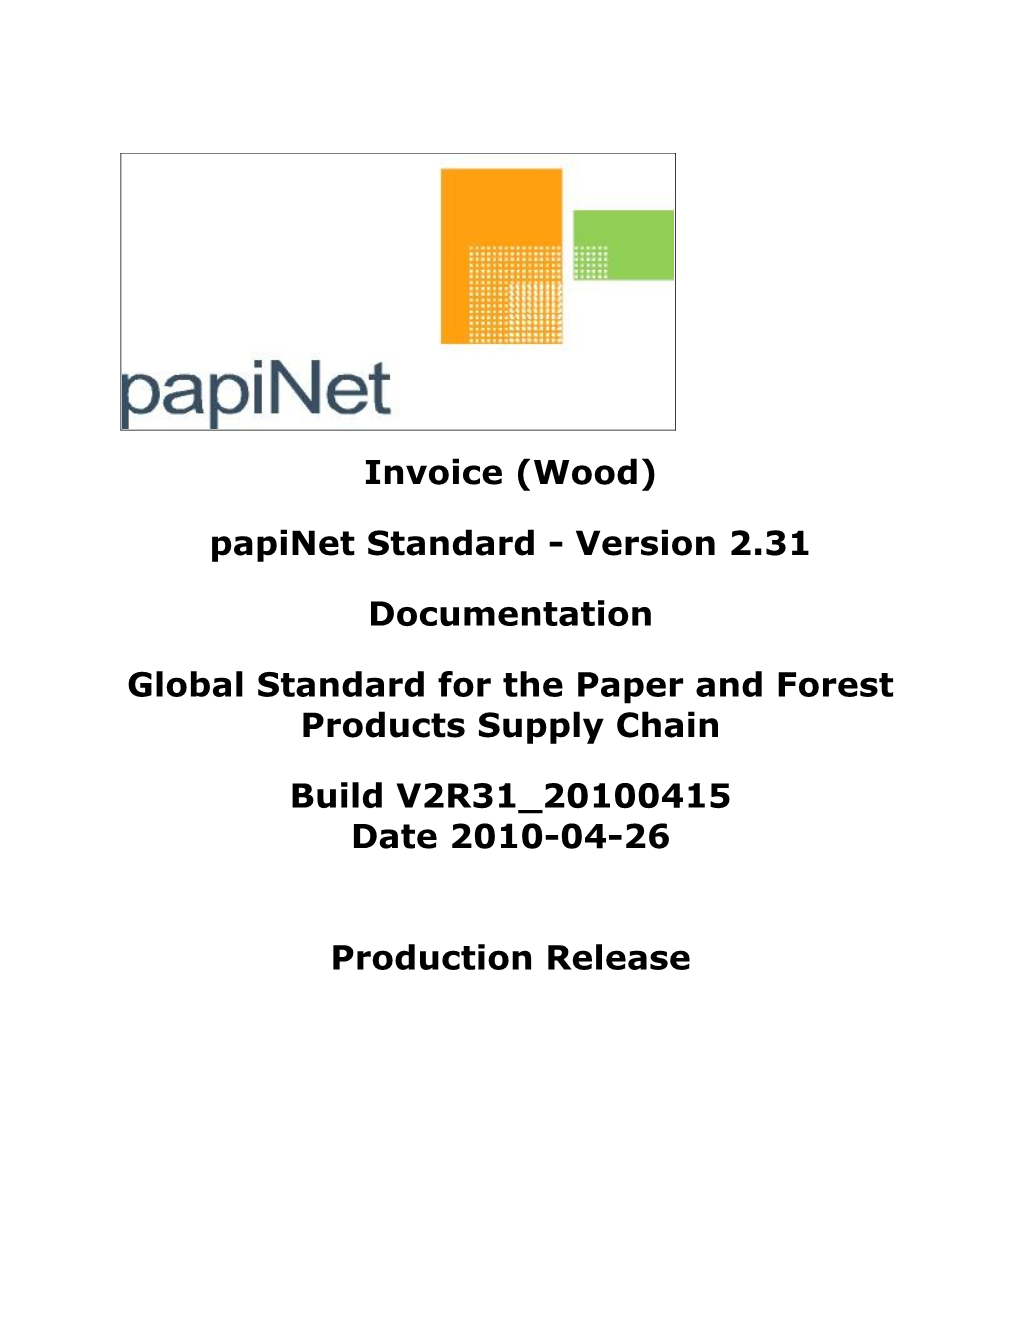 Global Standard for the Paper and Forest Products Supply Chain